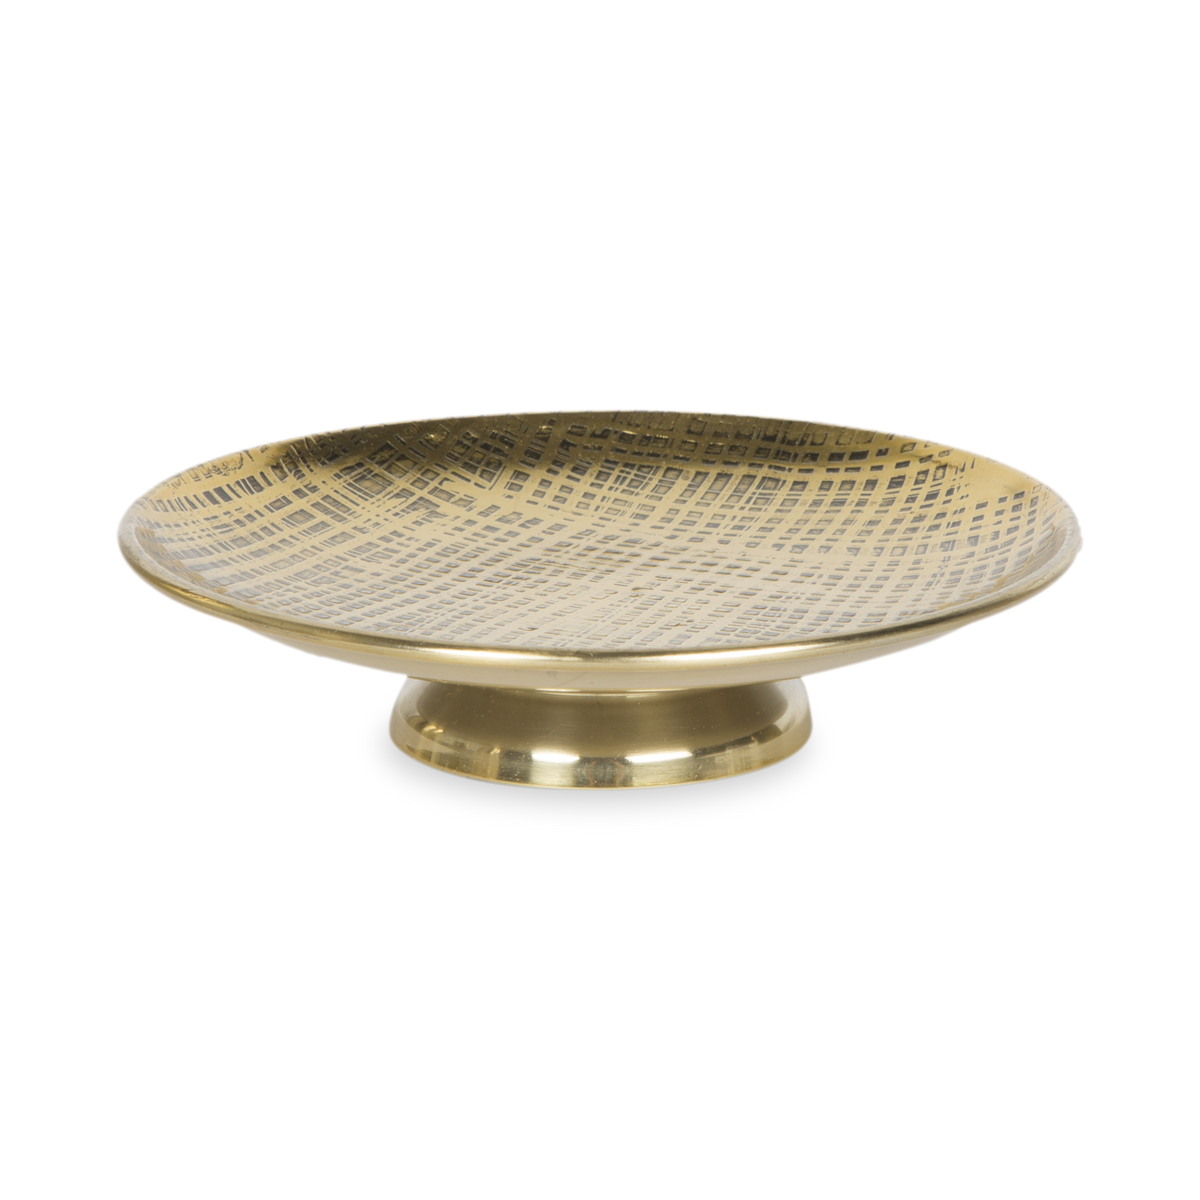 The richly finished Crosshatch Soap Dish showcases a distinct crosshatch texture in a brass finish.